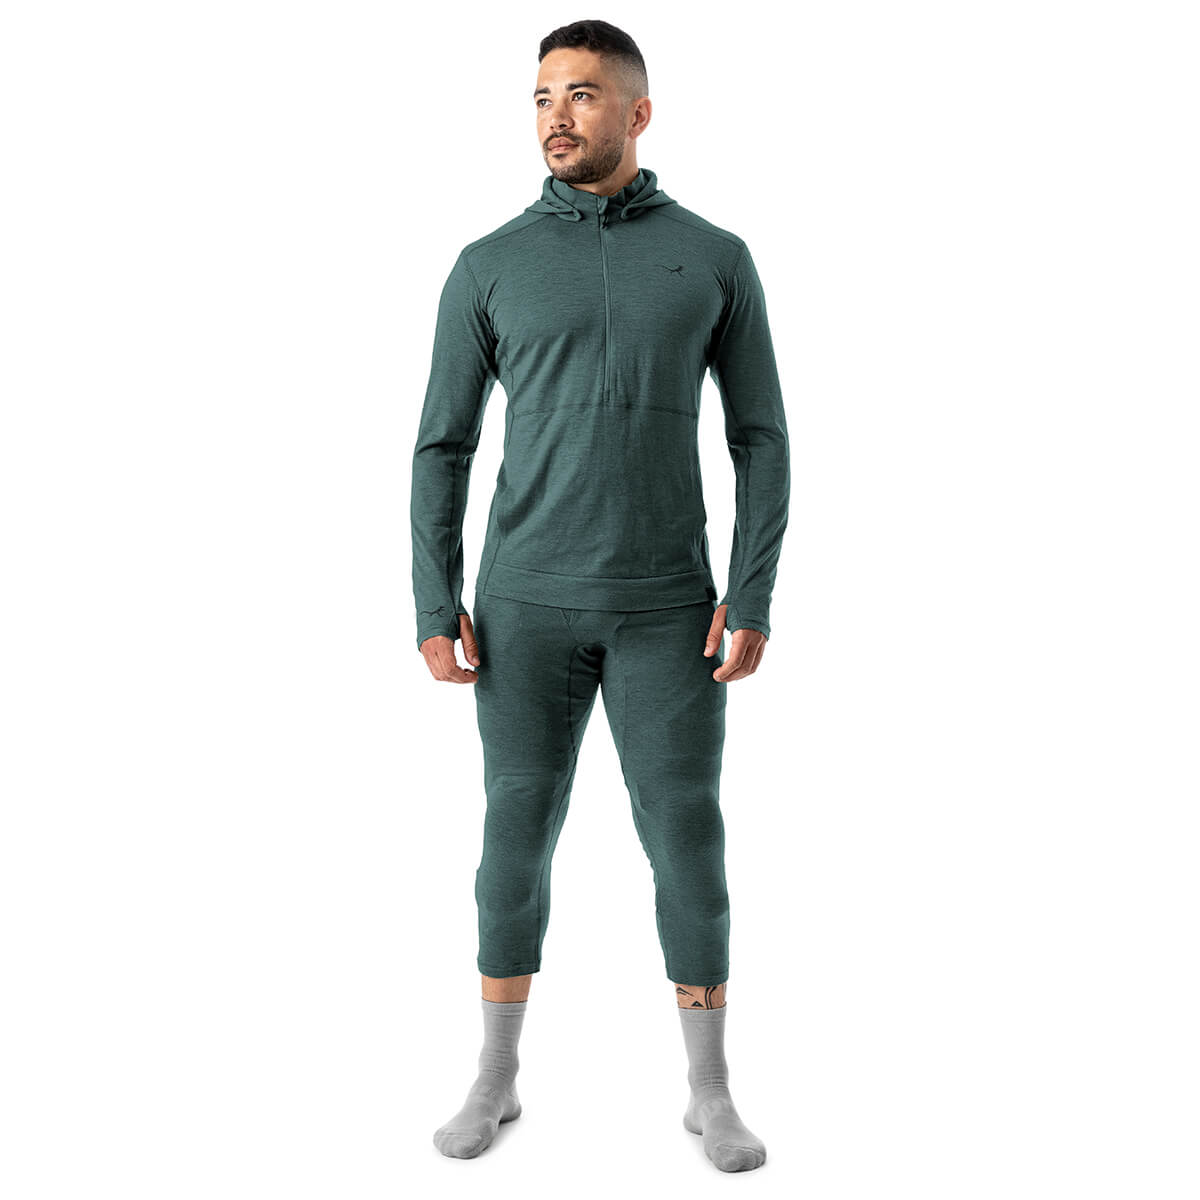 Mosko Moto Launches Line Of Merino Base Layers With 'Nuyarn' Tech